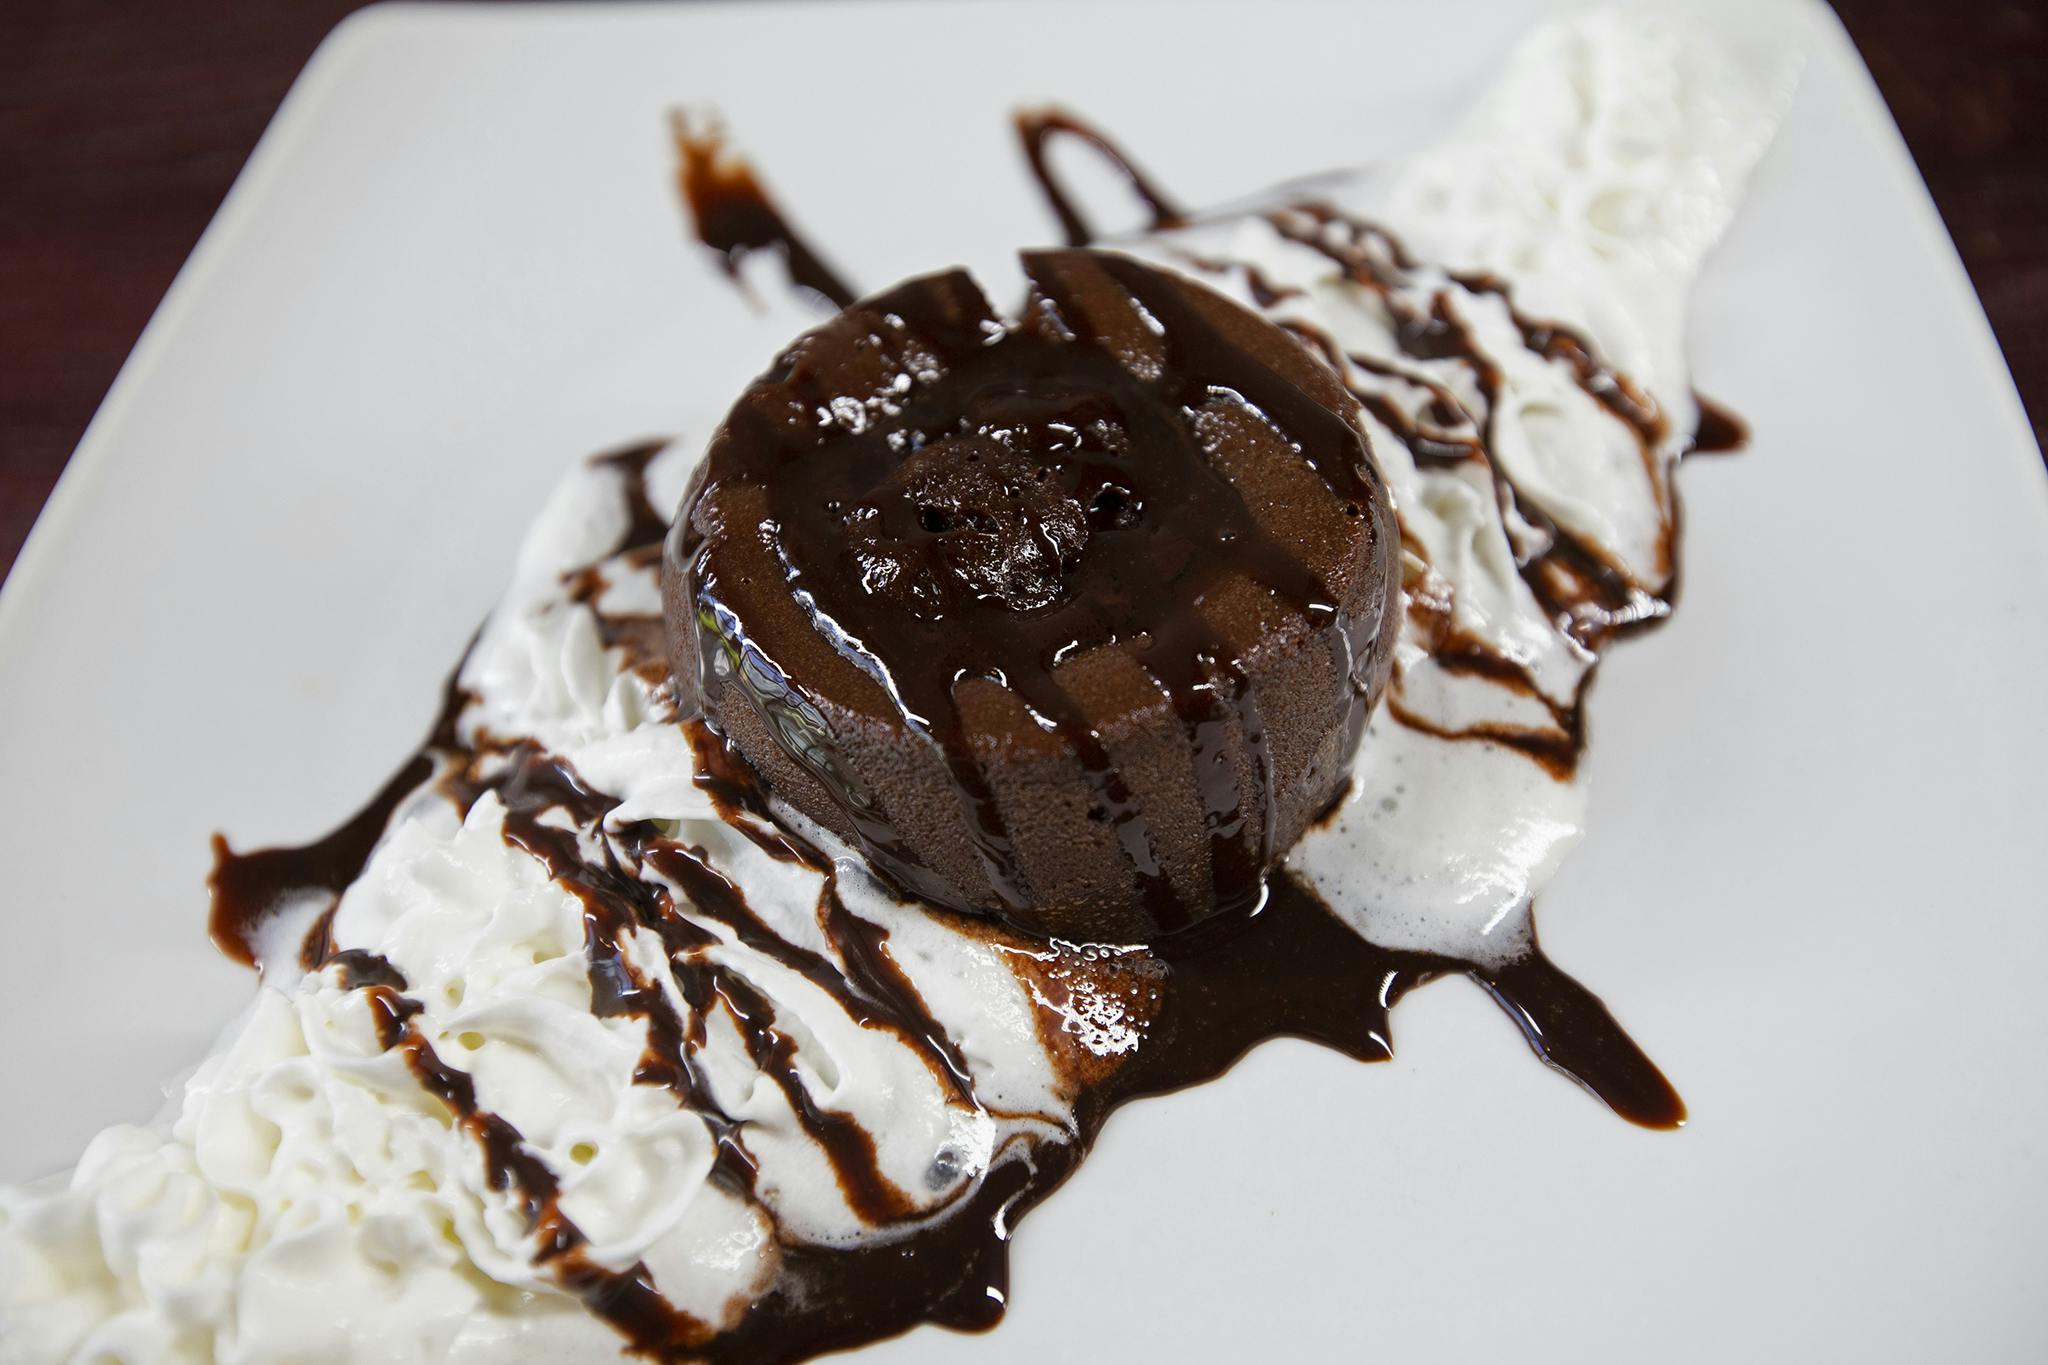 Molten Chocolate Lava Cake from Firehouse Grill - Chicago Ave in Evanston, IL